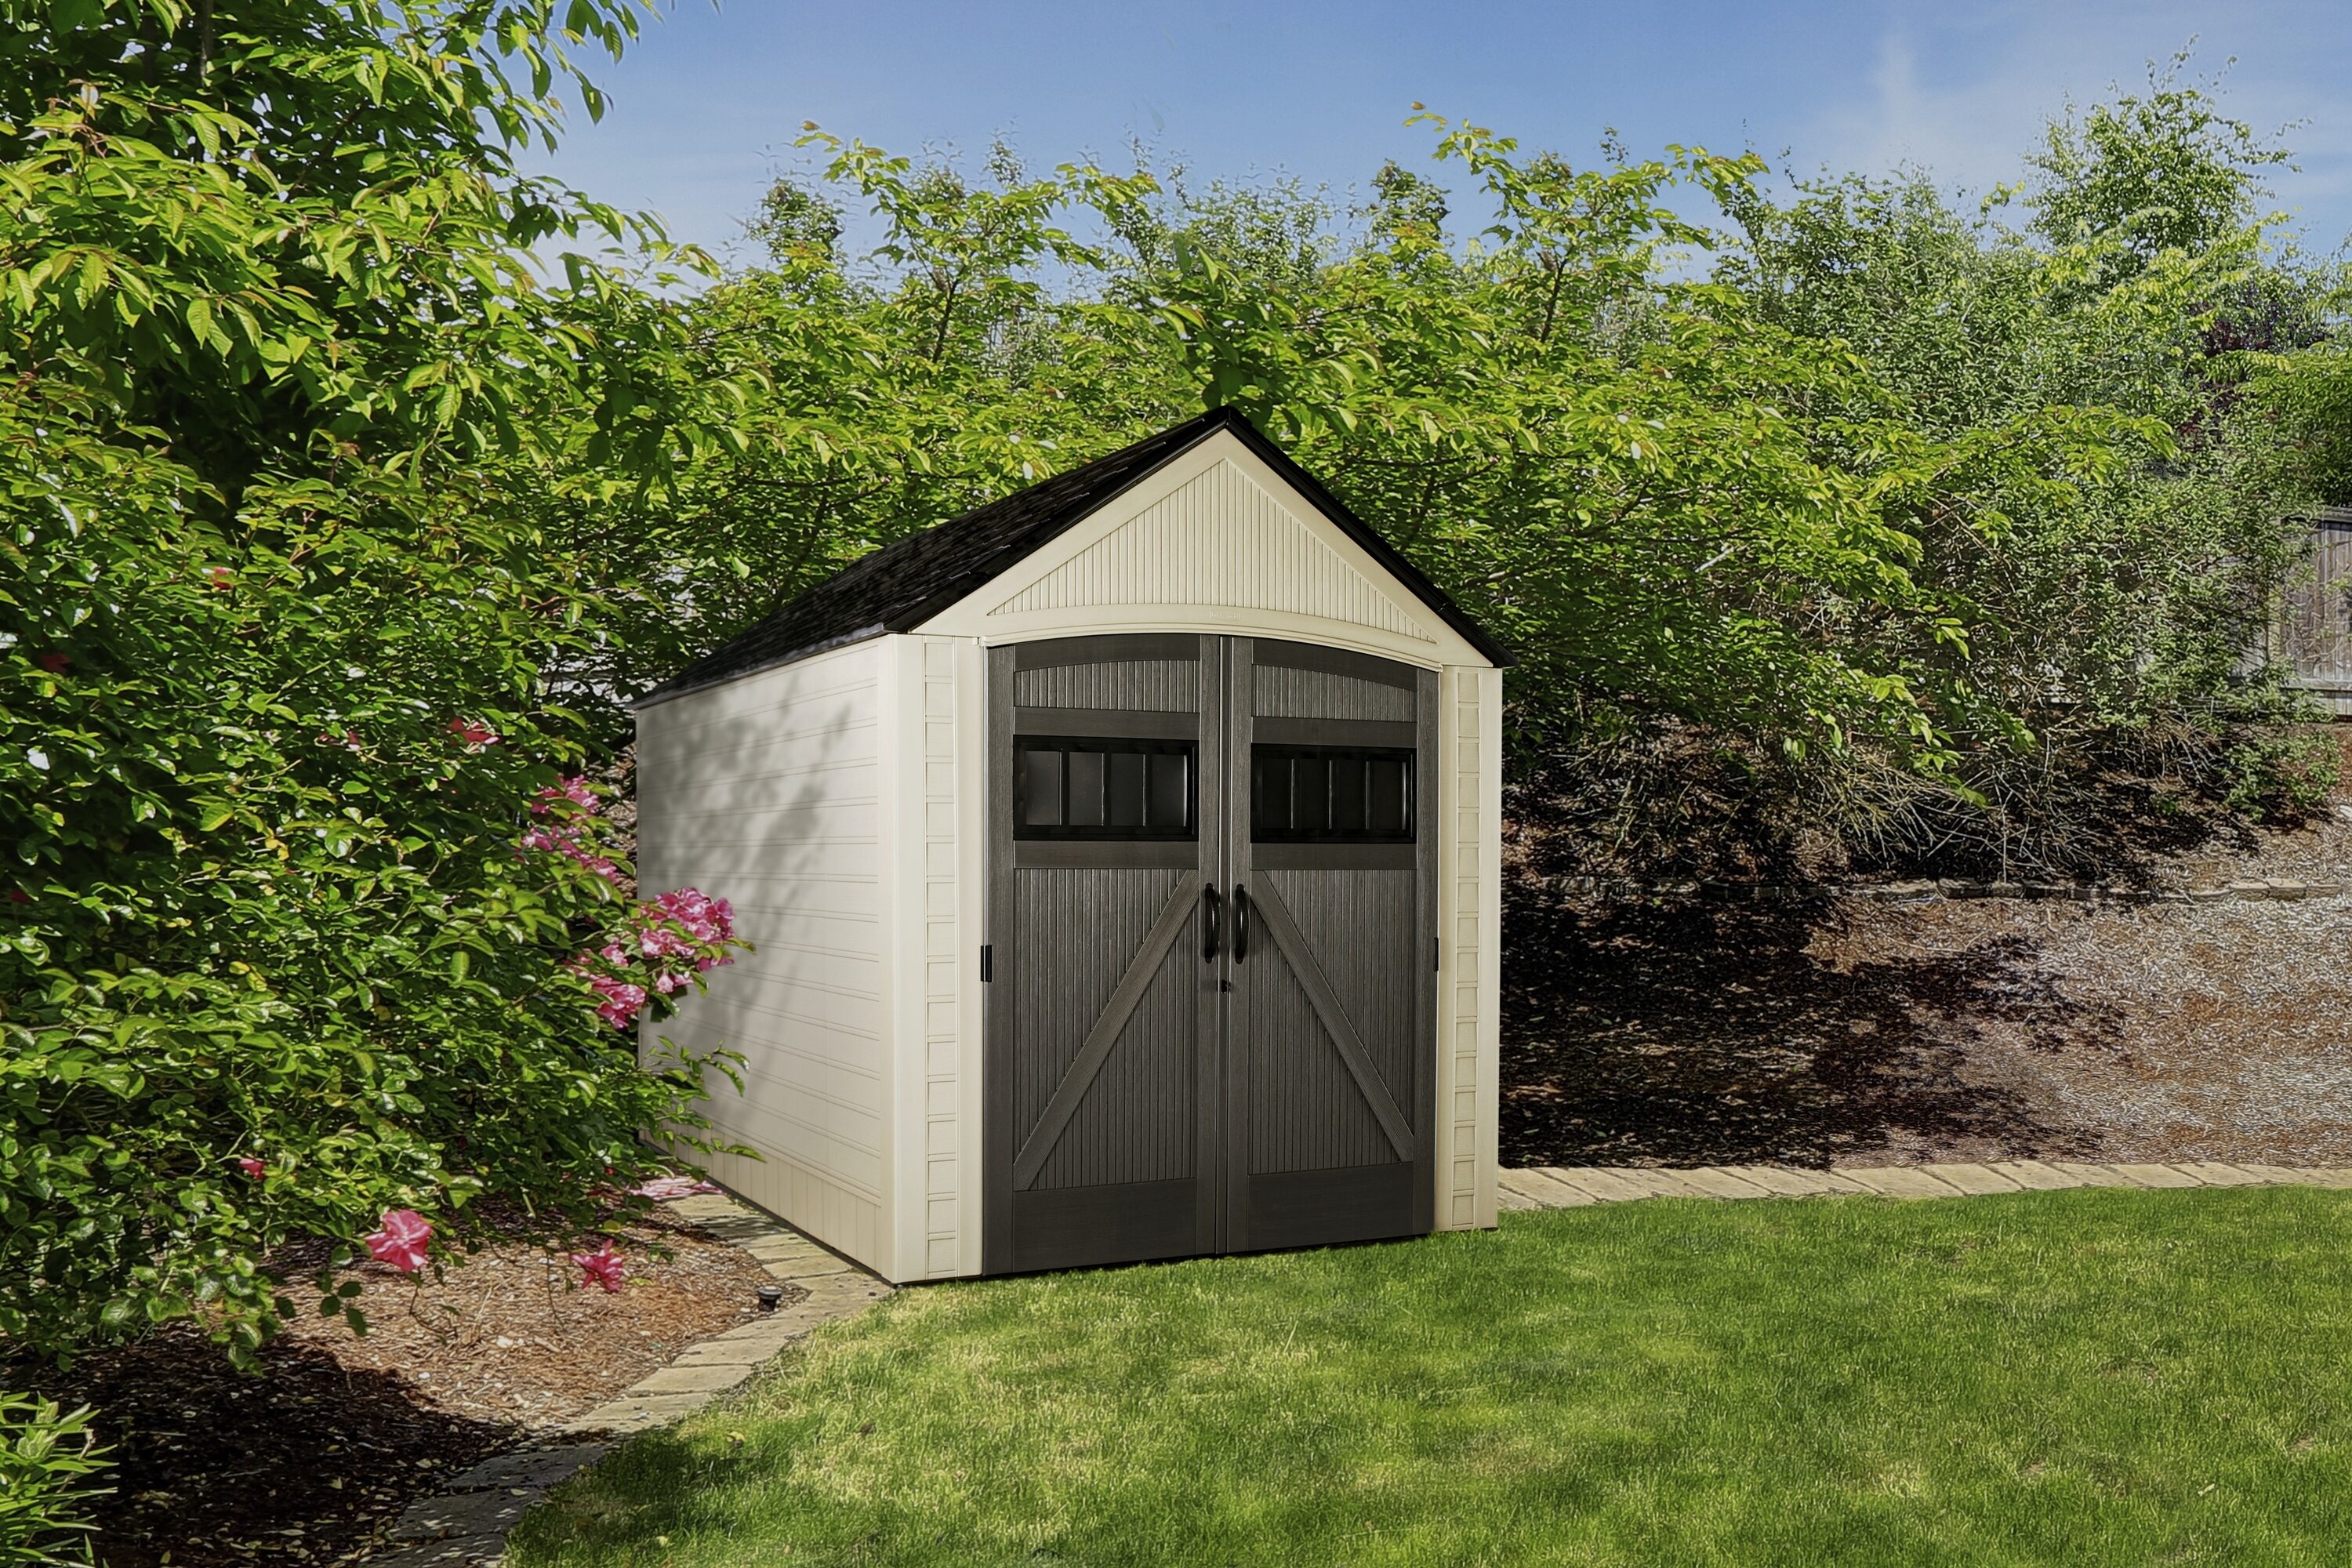 Rubbermaid 52-Cu. Ft. Outdoor Storage Shed (Lowest Price)